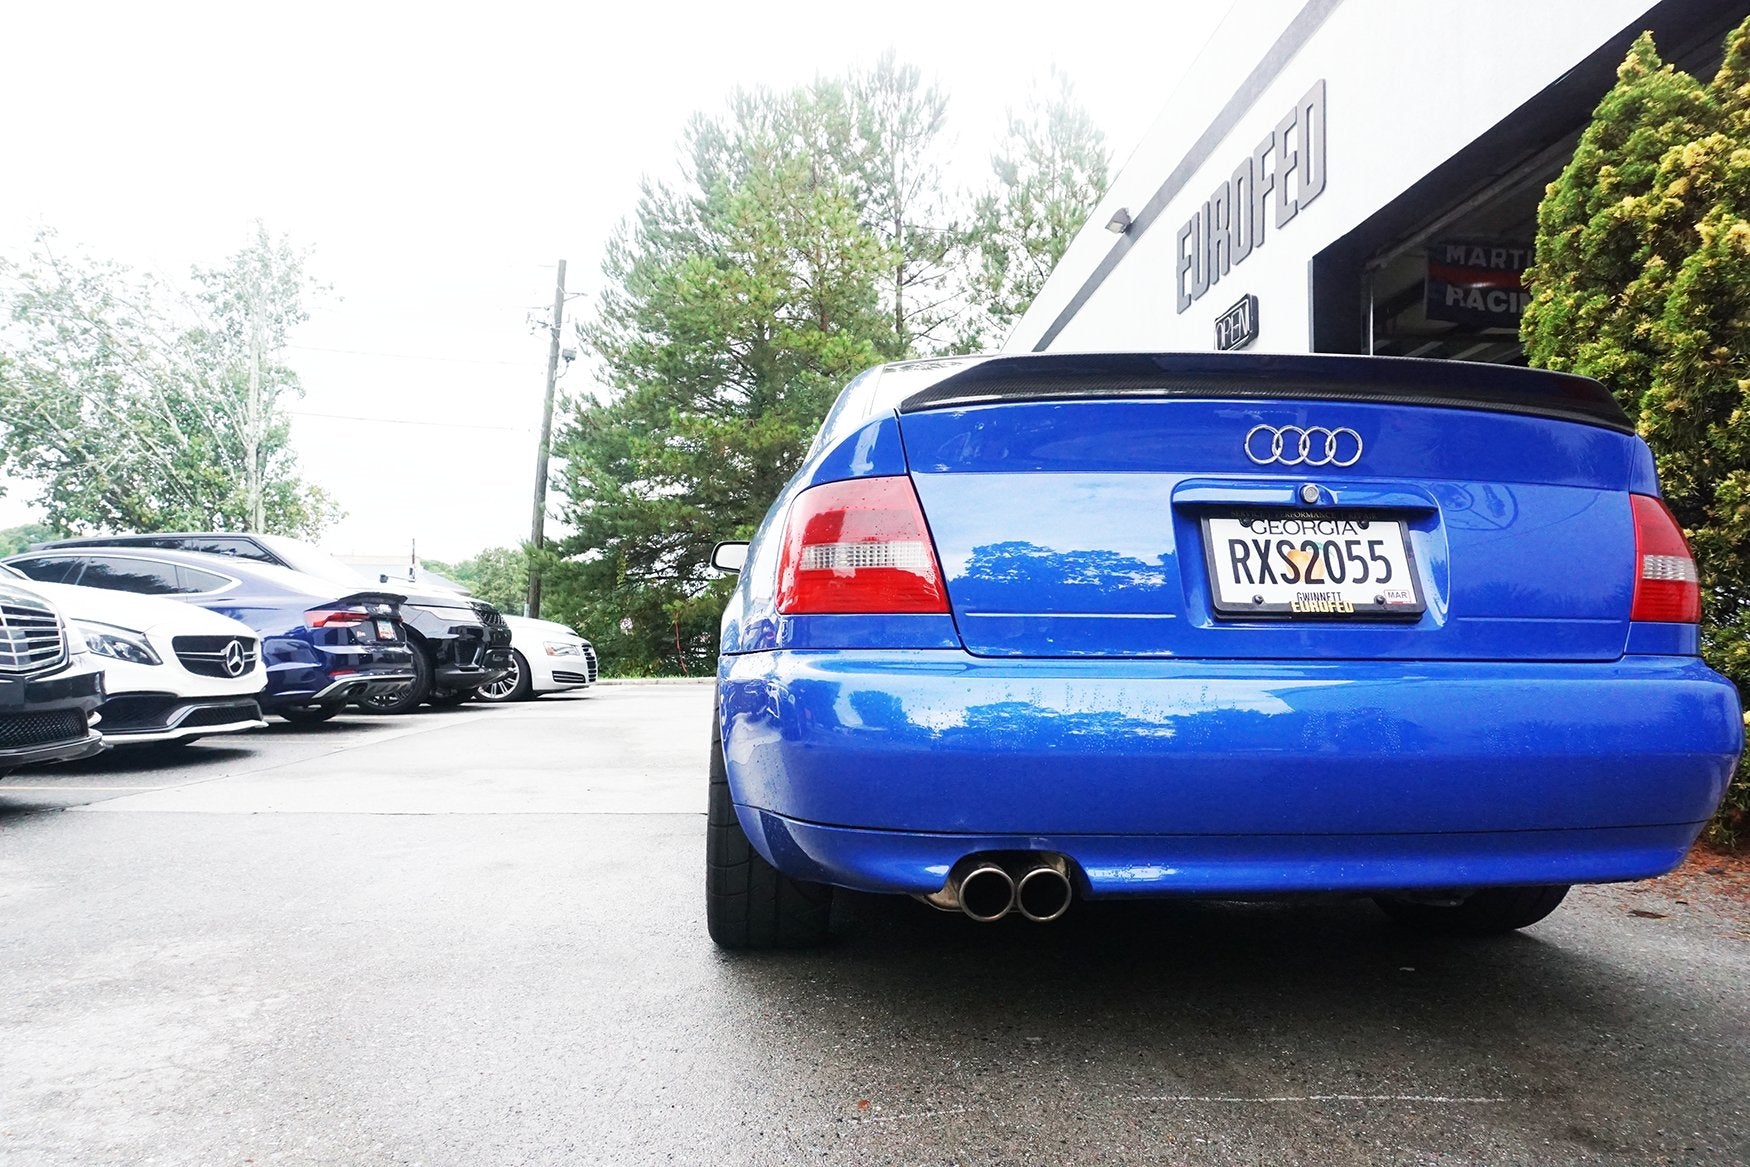 SPOILER (WITHOUT STOPLIGHT) AUDI A4 B5, Spoilering \ Maxton Design \ Audi  \ A4 \ B5